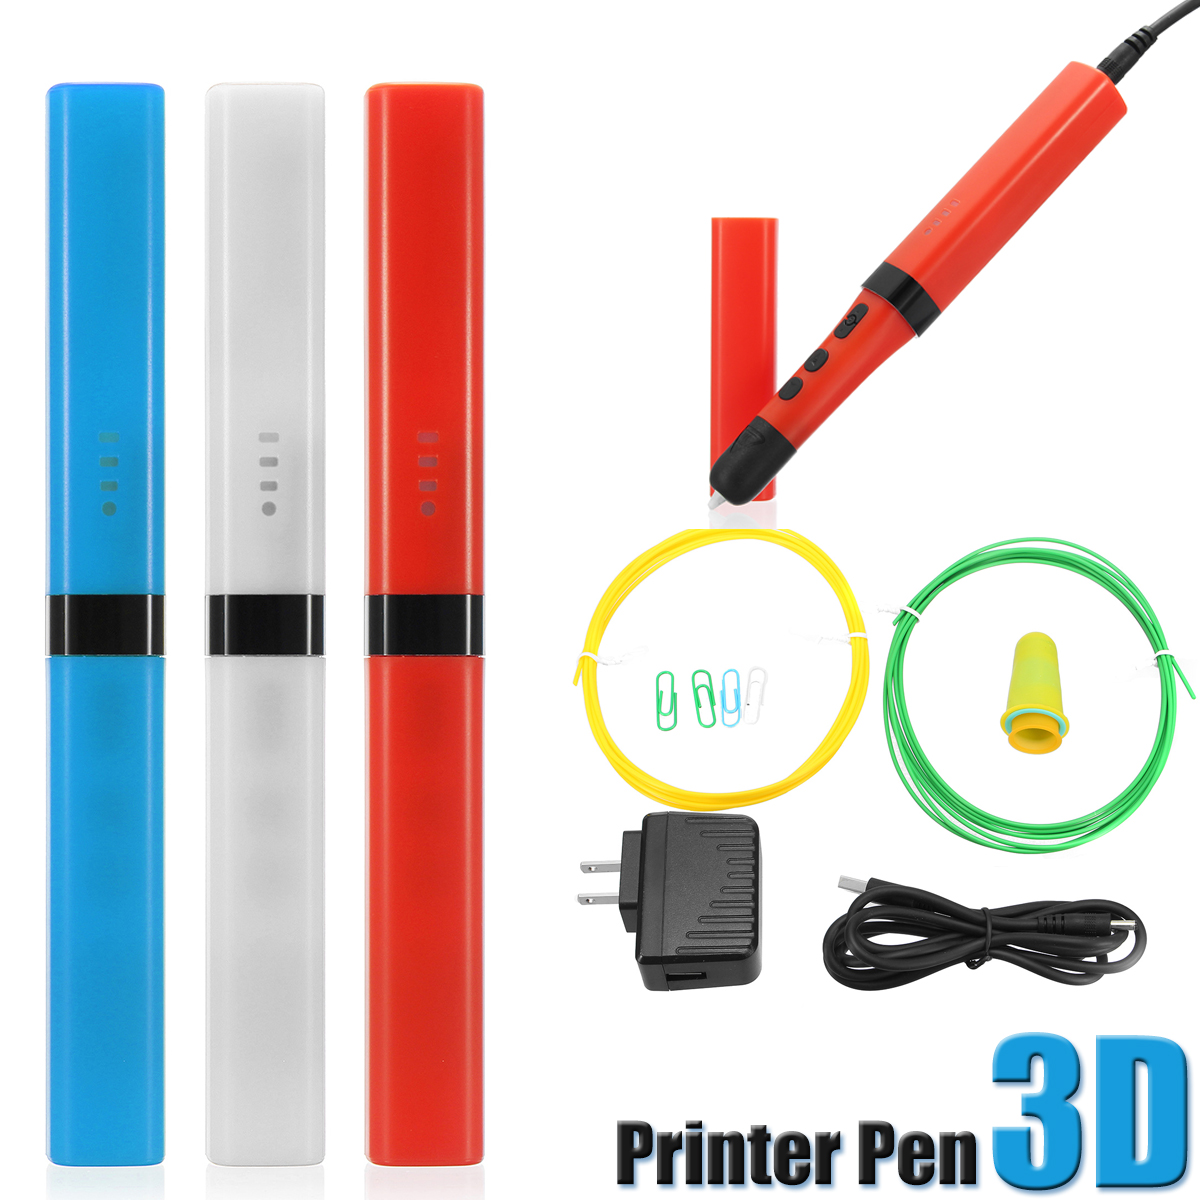 Red/White/Blue 5V/2A 1.75mm 0.7mm Nozzle Low Temperature 3D Printing Pen For Children 25